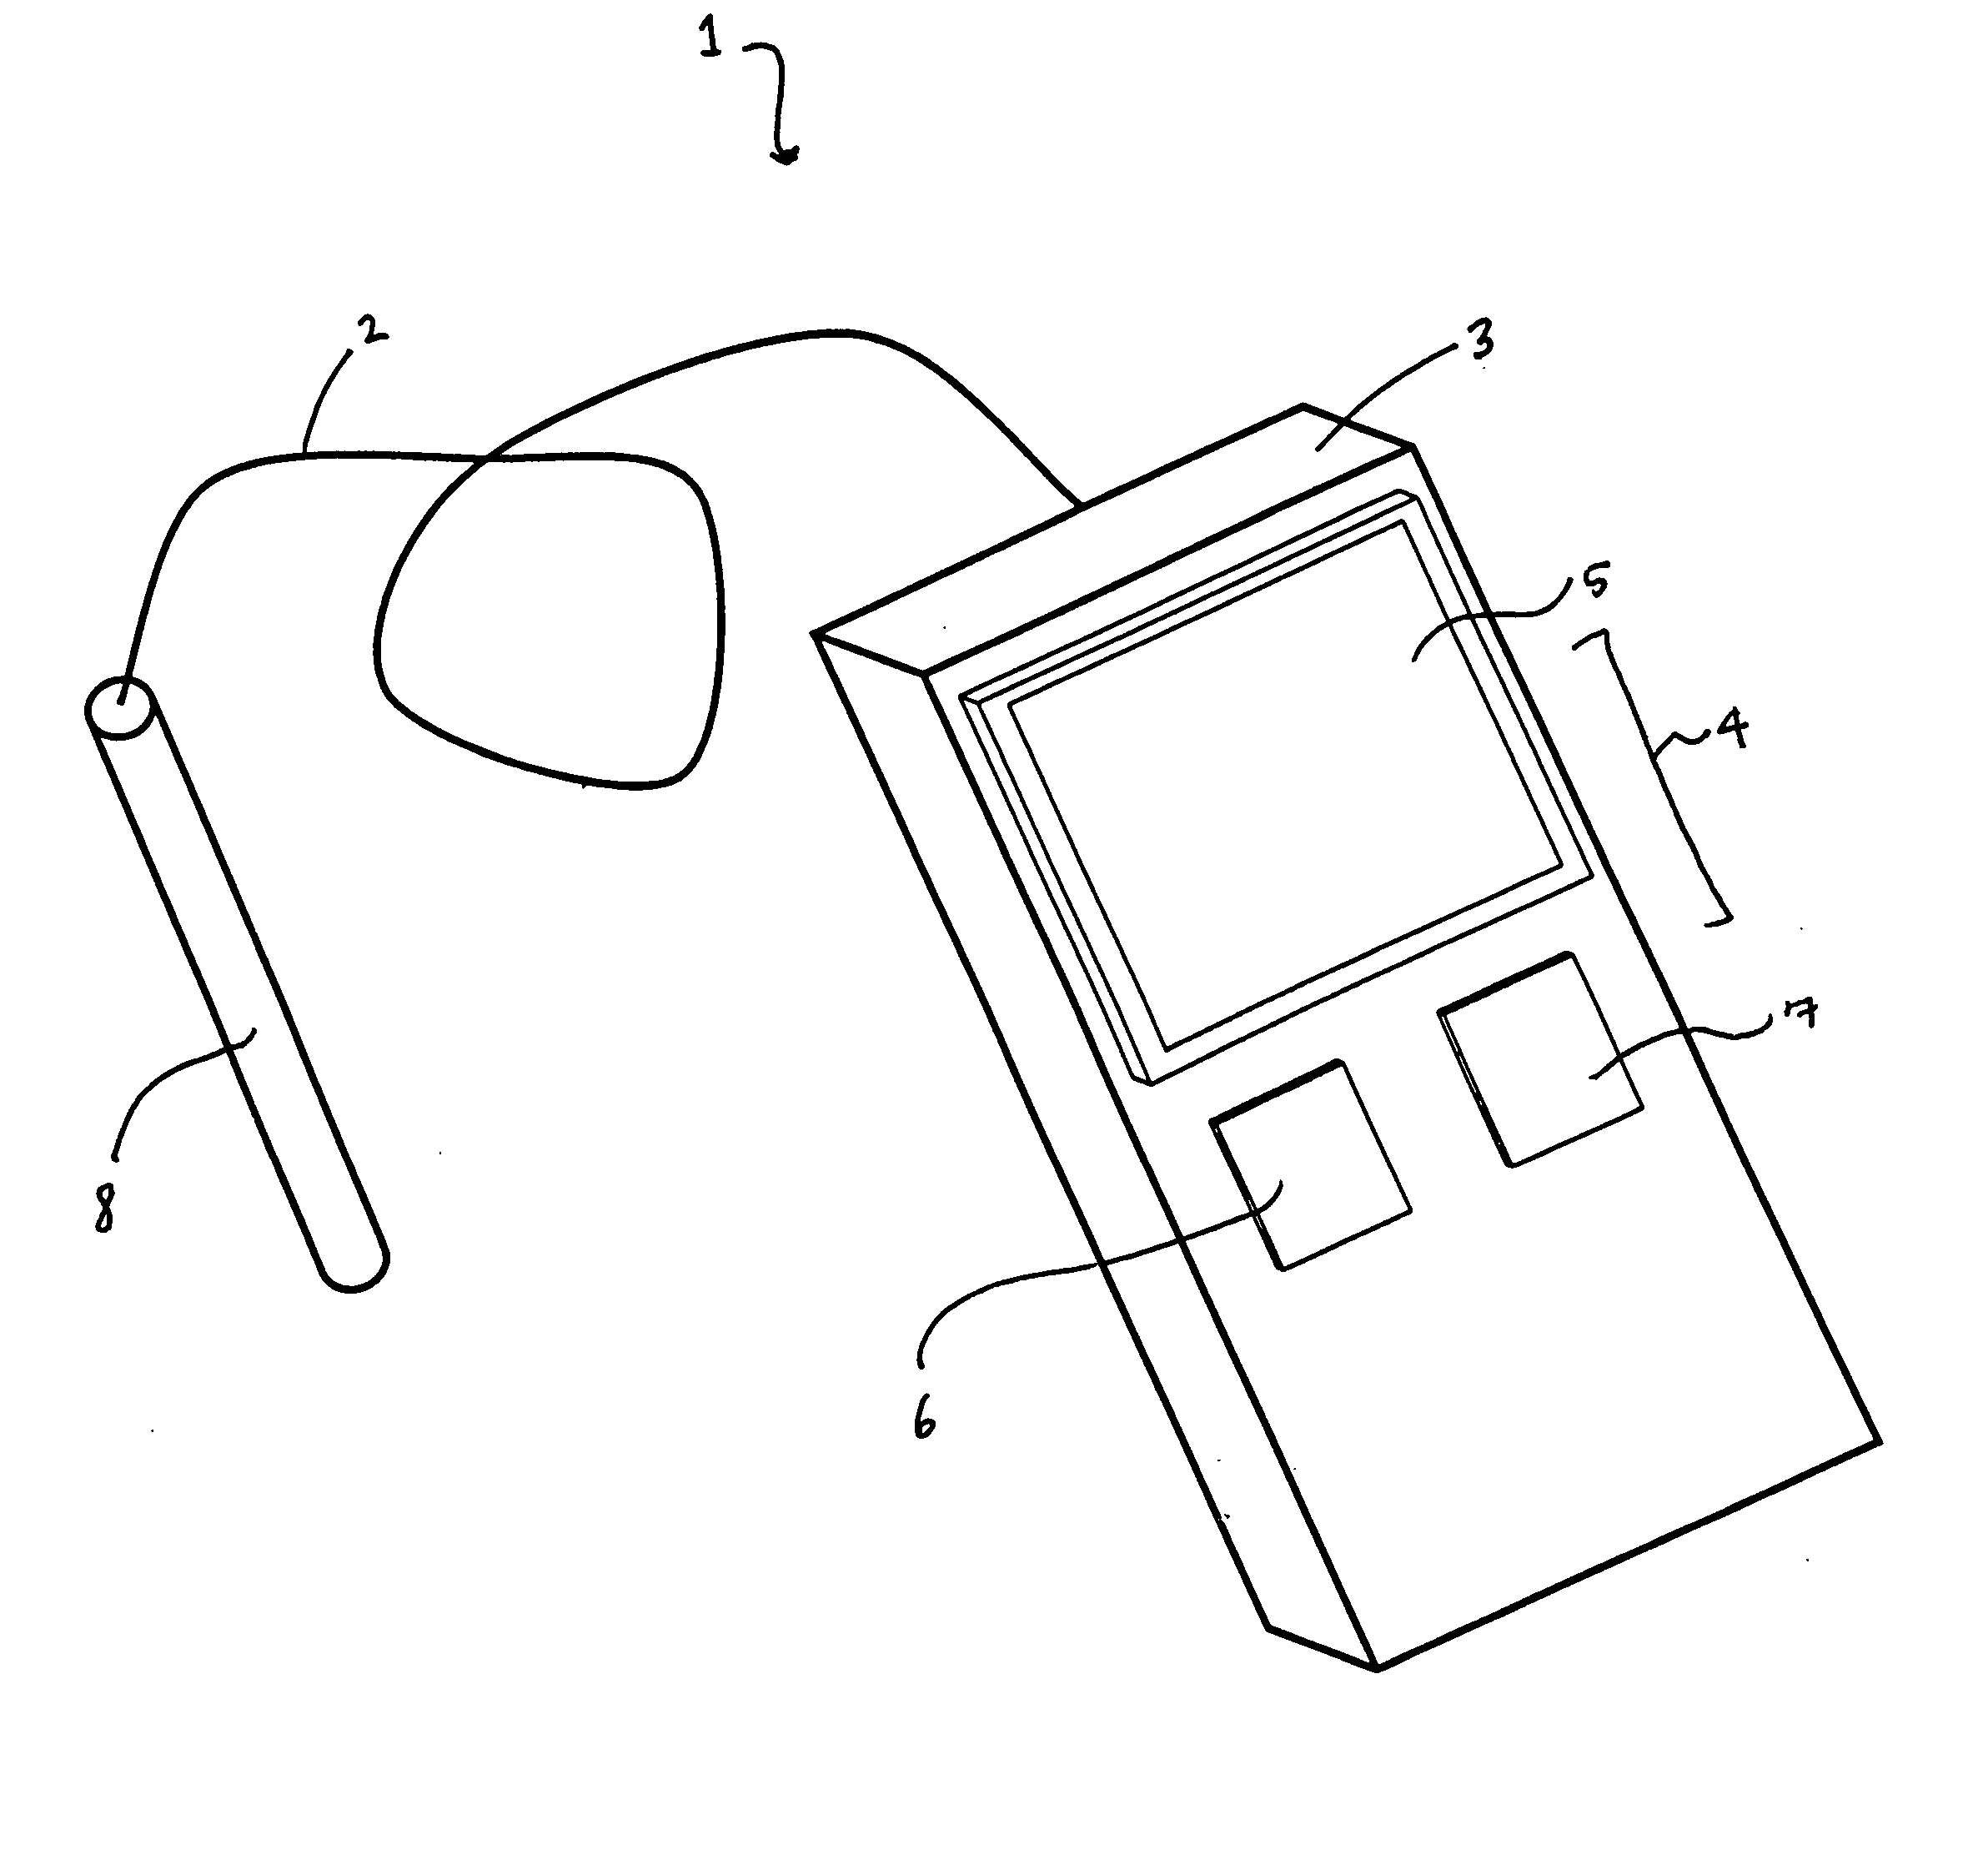 Insertable ultrasound probes, systems, and methods for thermal therapy